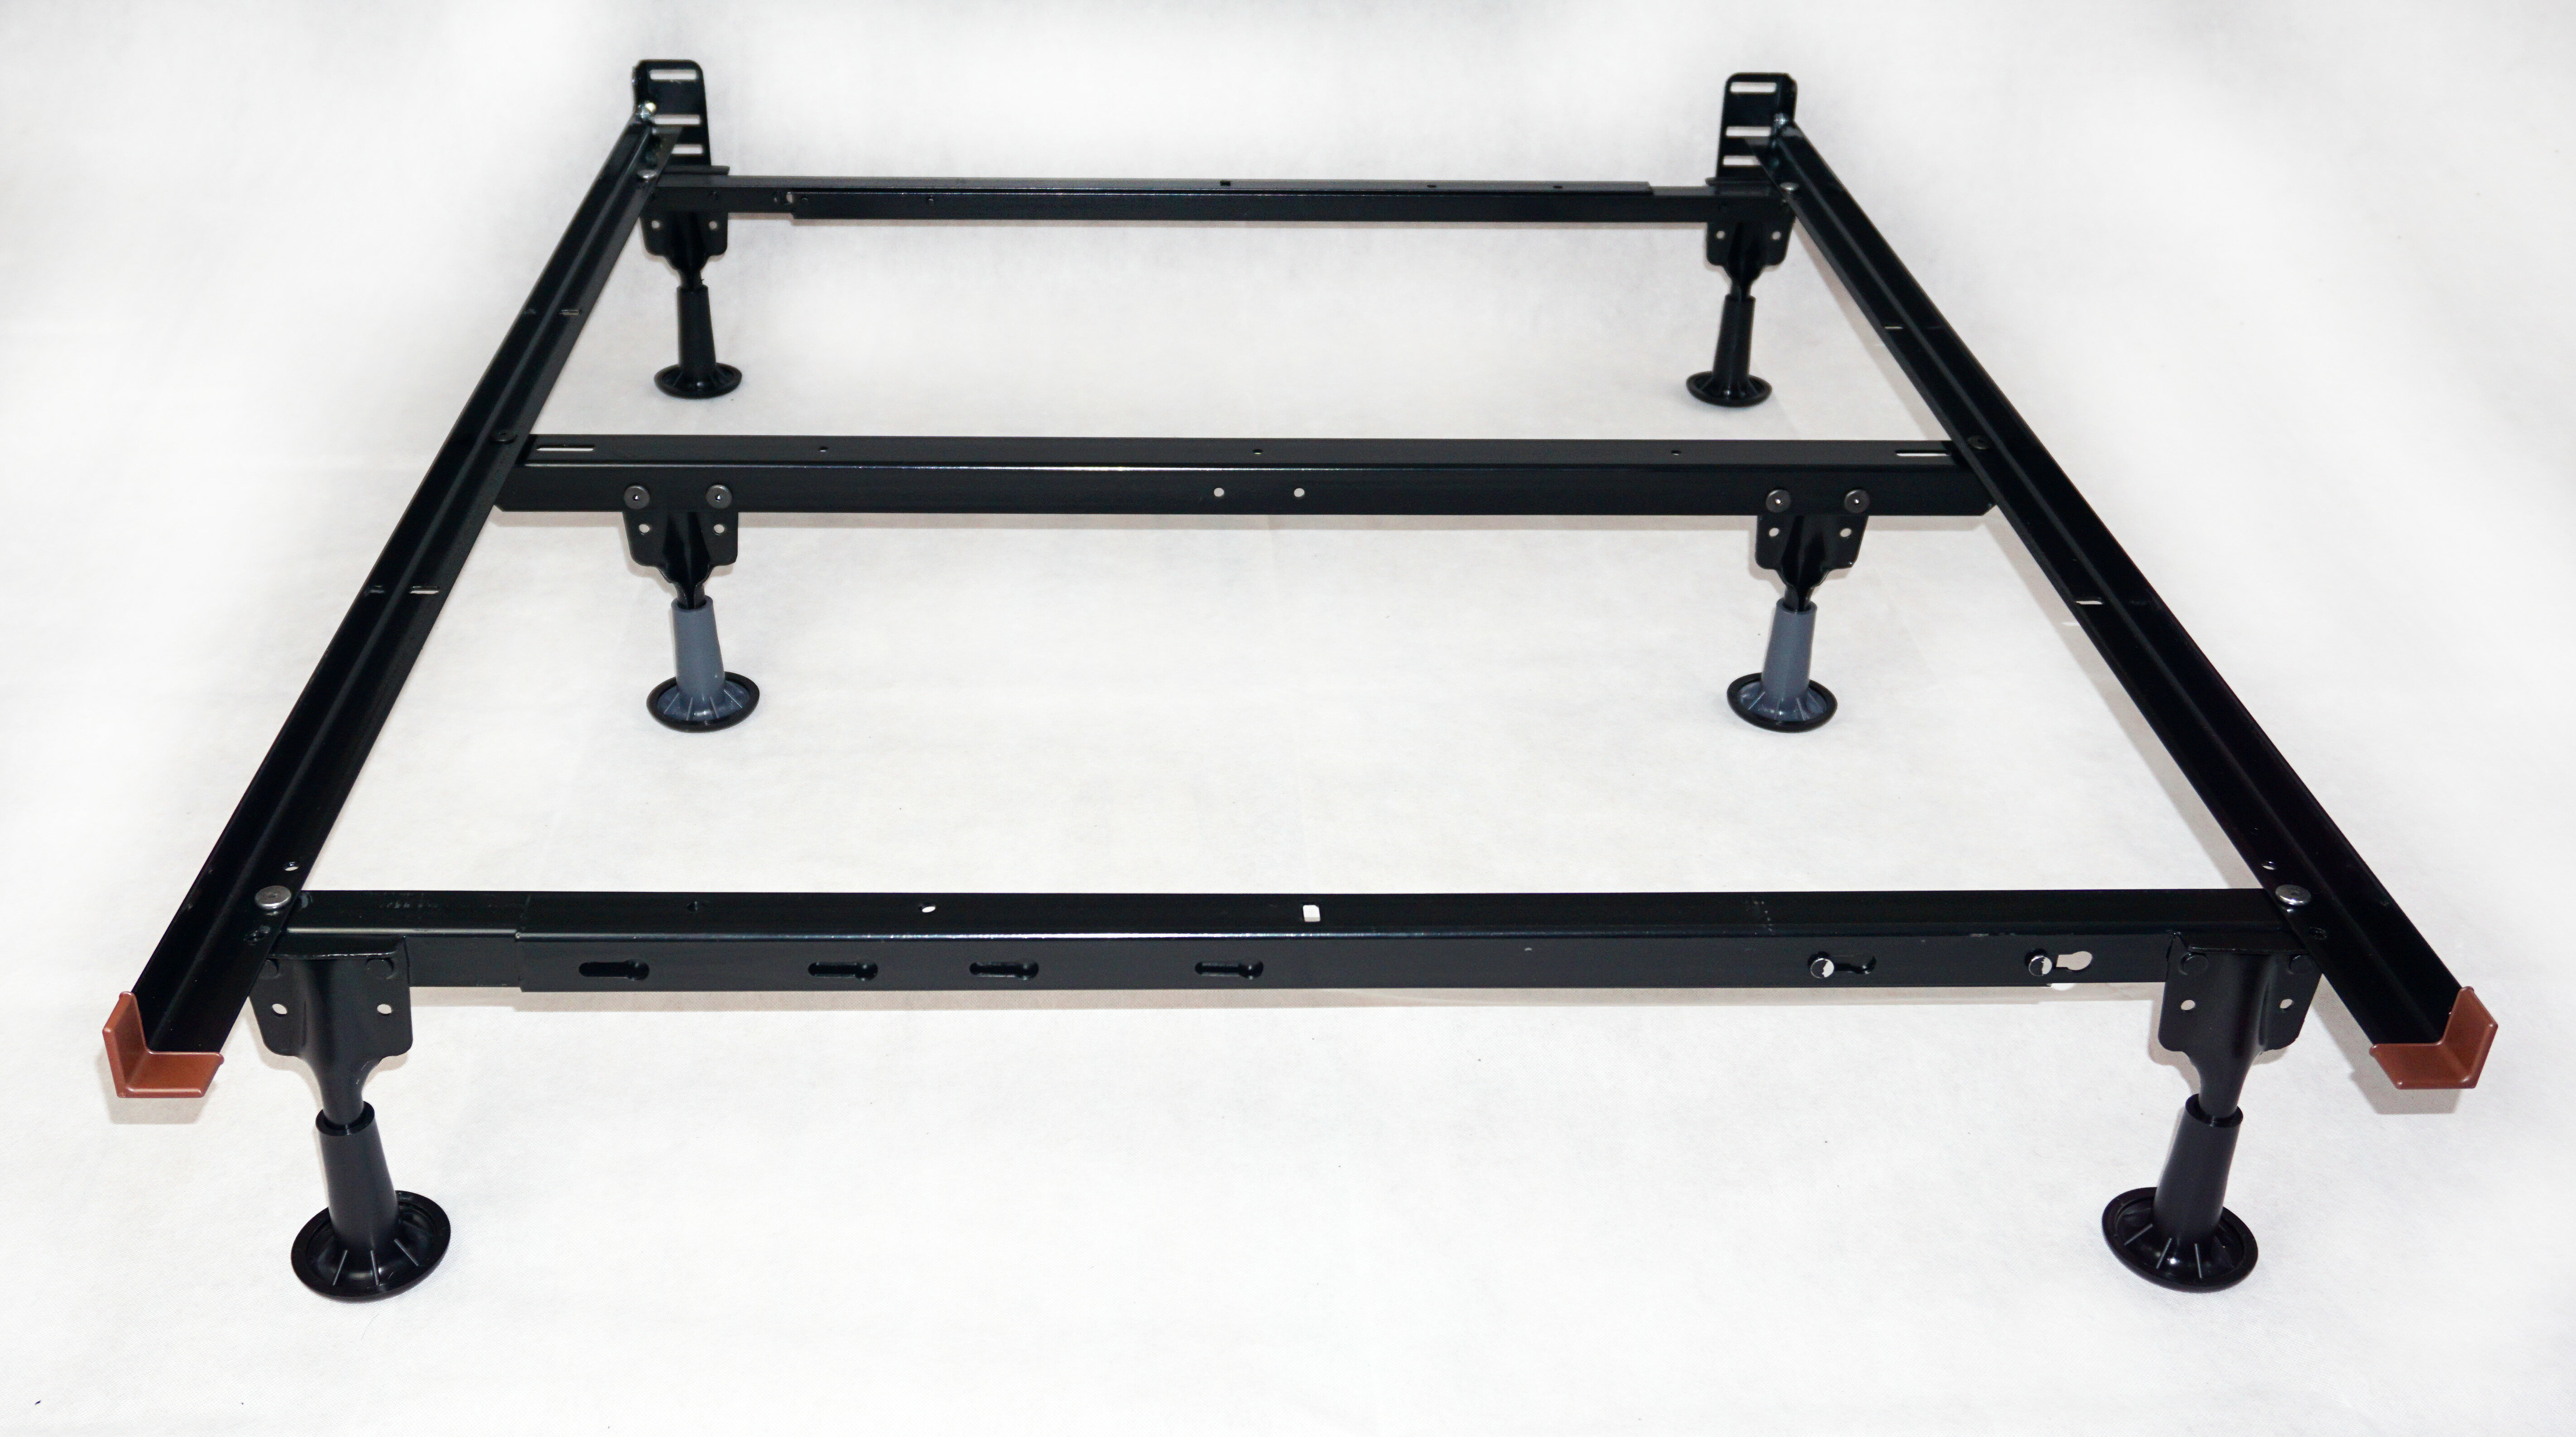 Heavy Duty Metal Bed Frame Adjustable Strong Steel Full Queen King Size 7 inches 